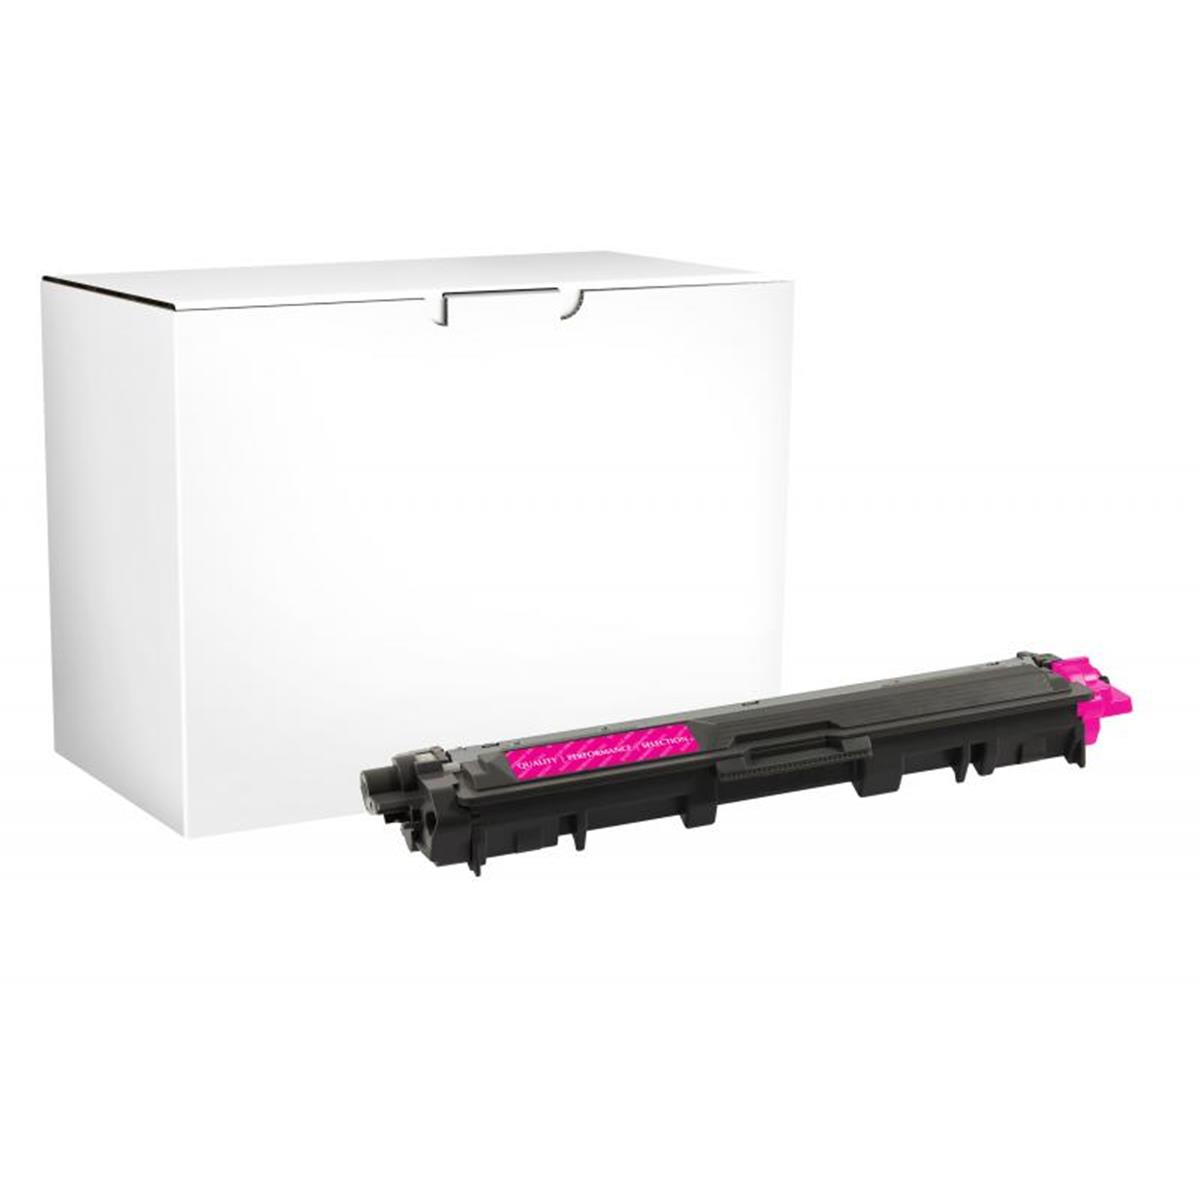 Picture of Brother 200733 High Yield Magenta Toner Cartridge for TN225